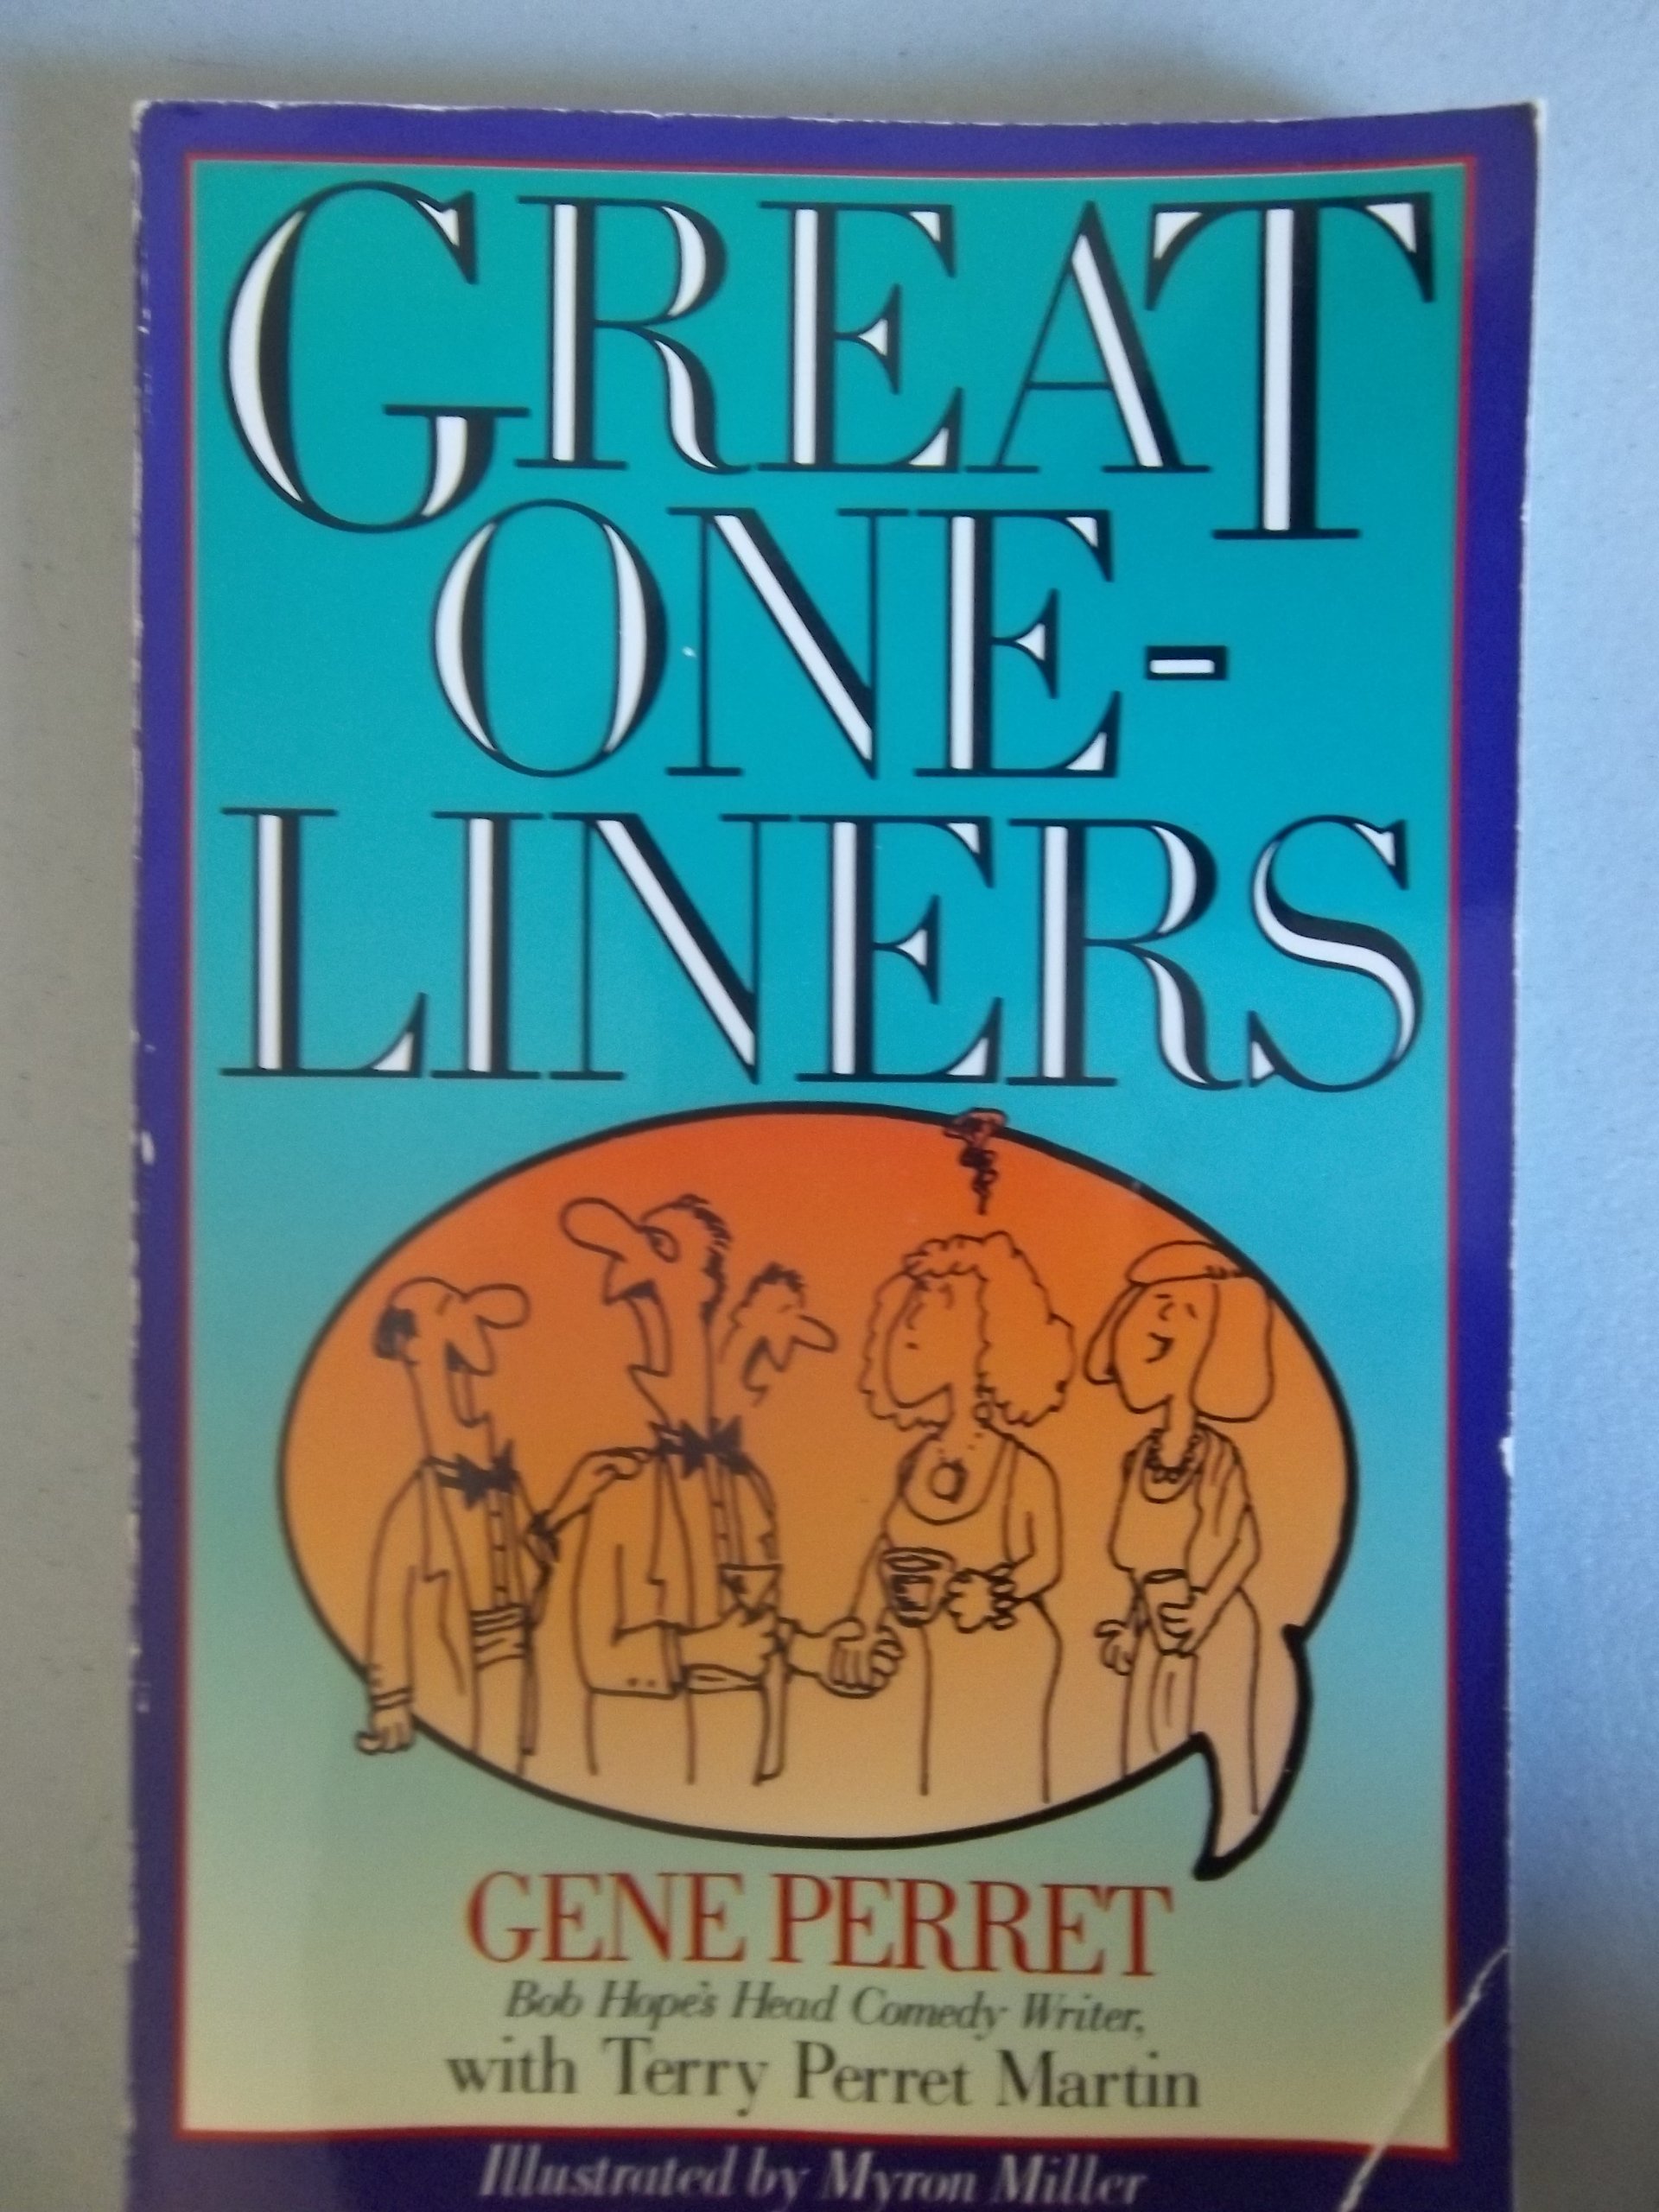 Great one-liners magazine reviews